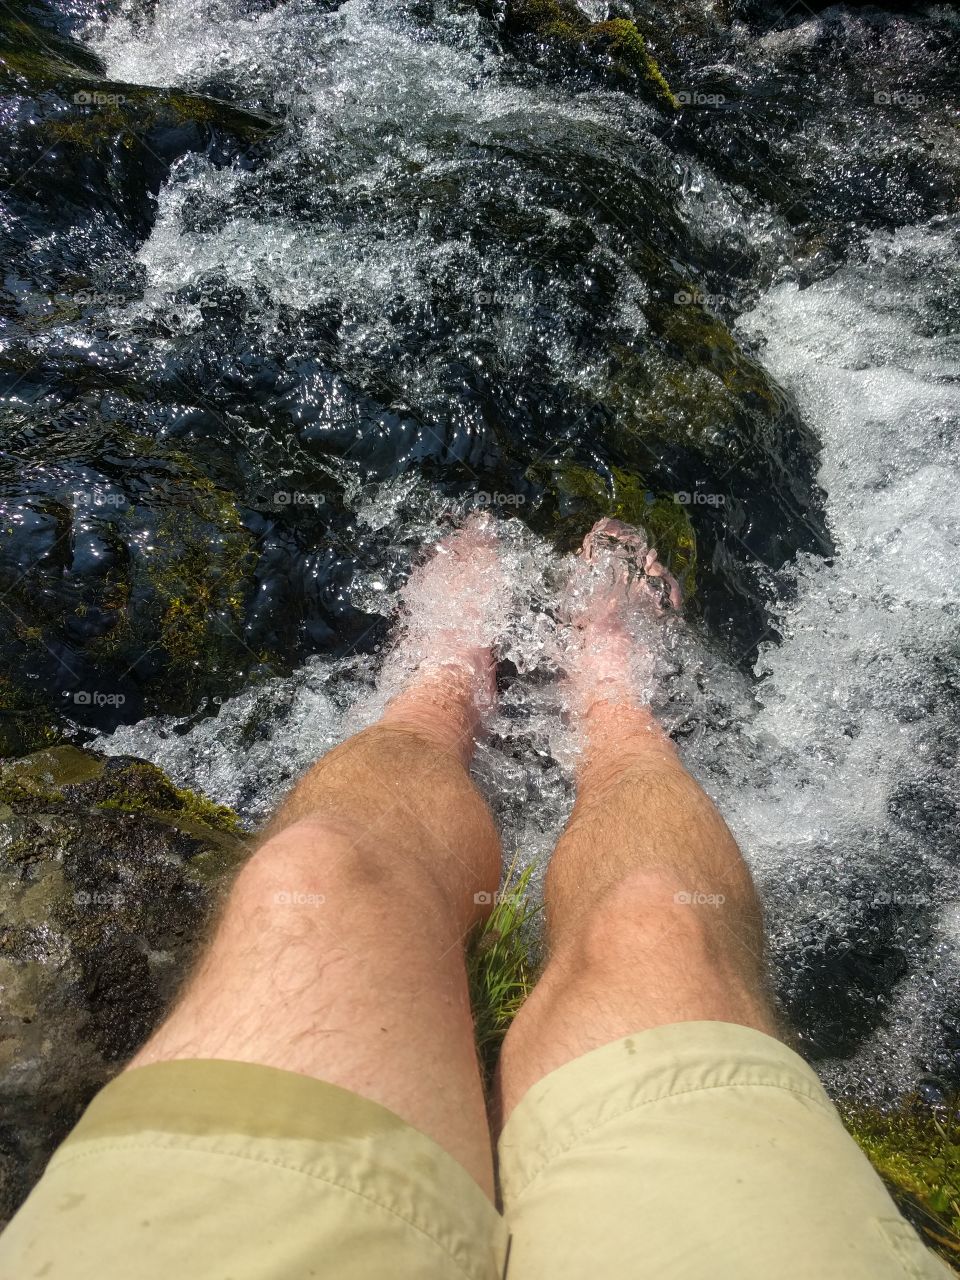 chilling feet in glacial high mountain stream after hiking